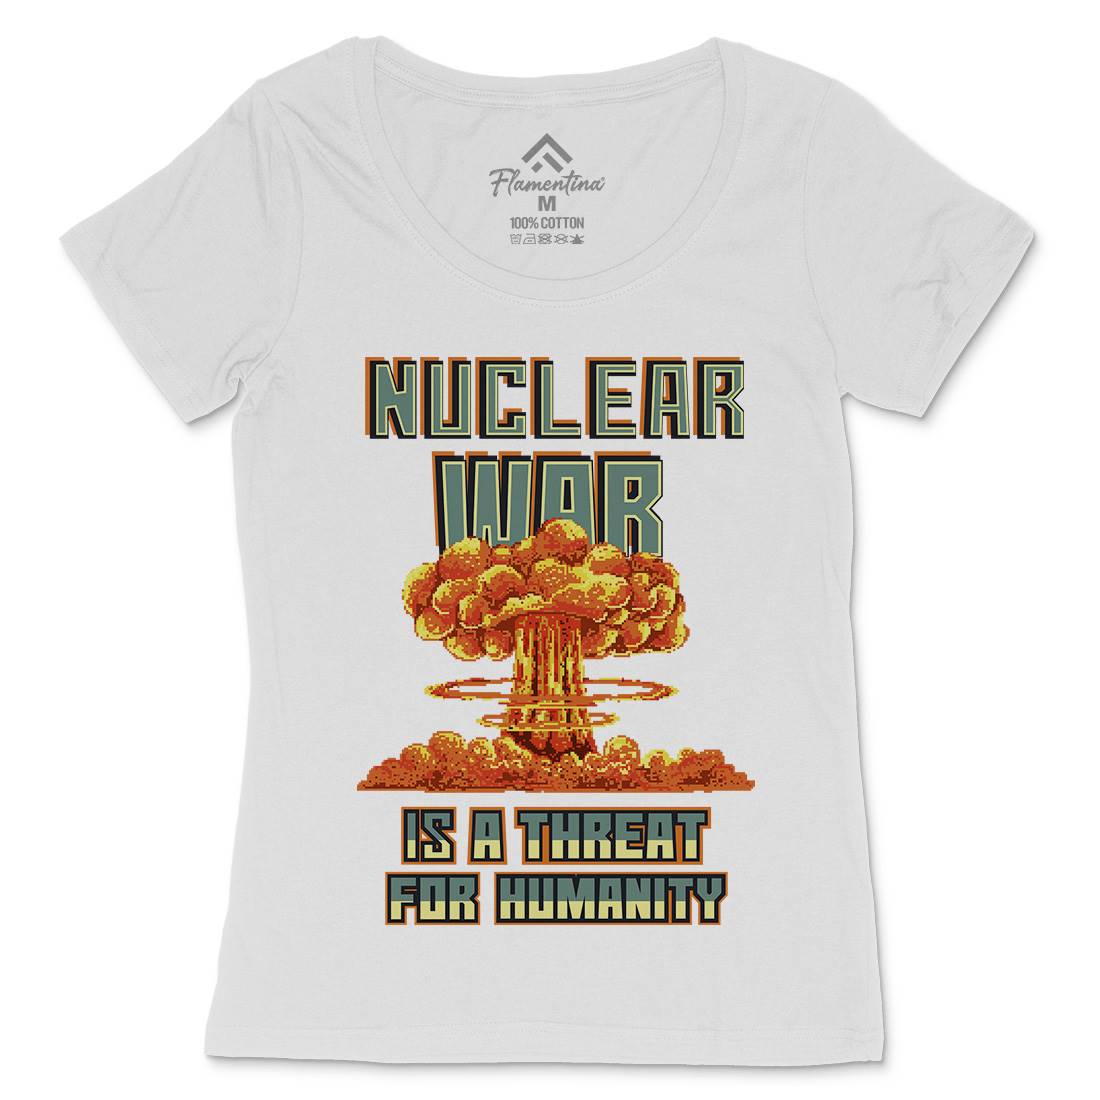 Nuclear War Is A Threat For Humanity Womens Scoop Neck T-Shirt Army B941